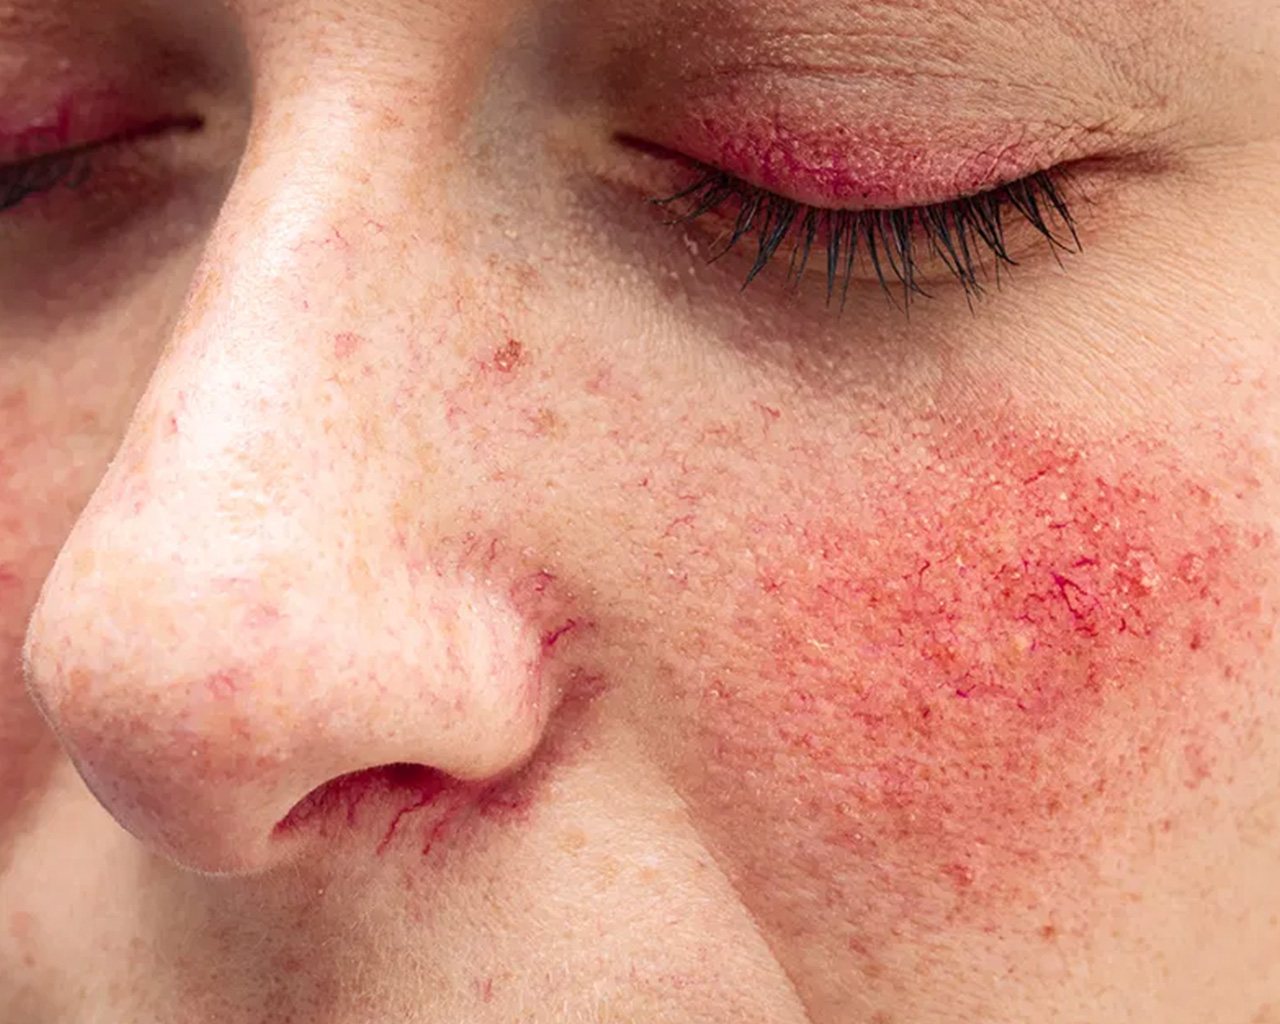 A close up of rosacea on a female cheek